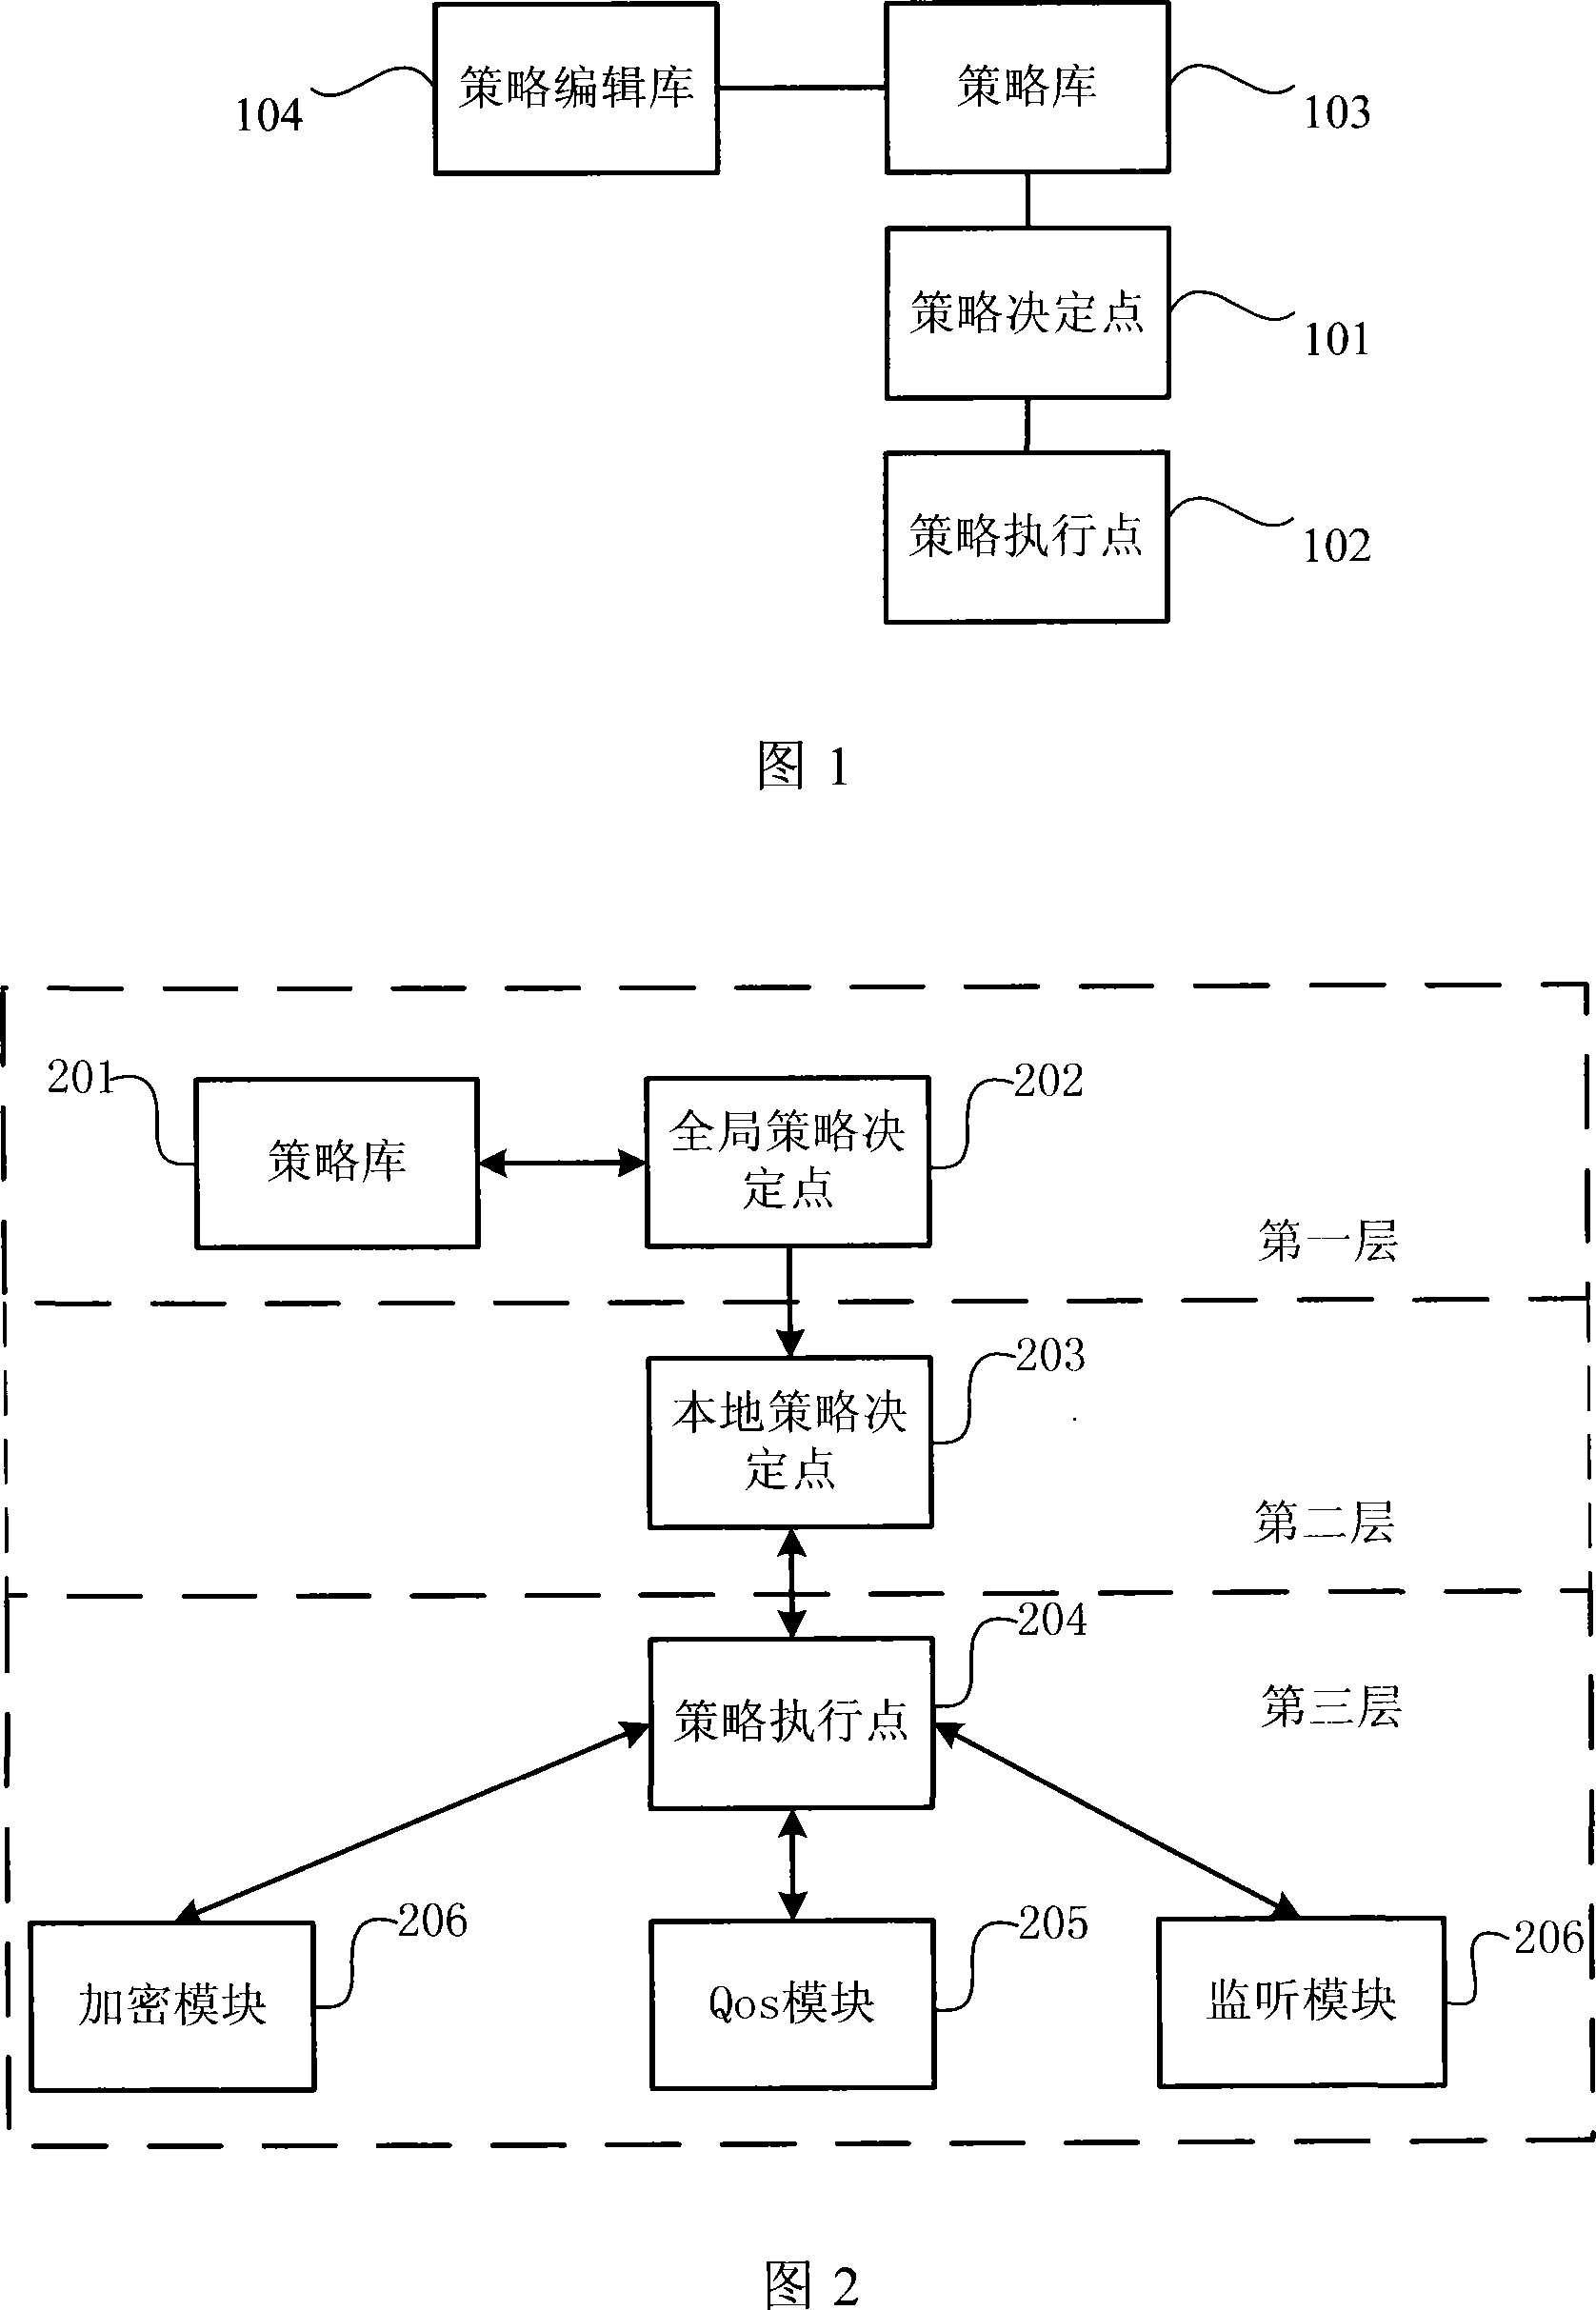 Network policy architecture for legal monitoring system and its policy processing method